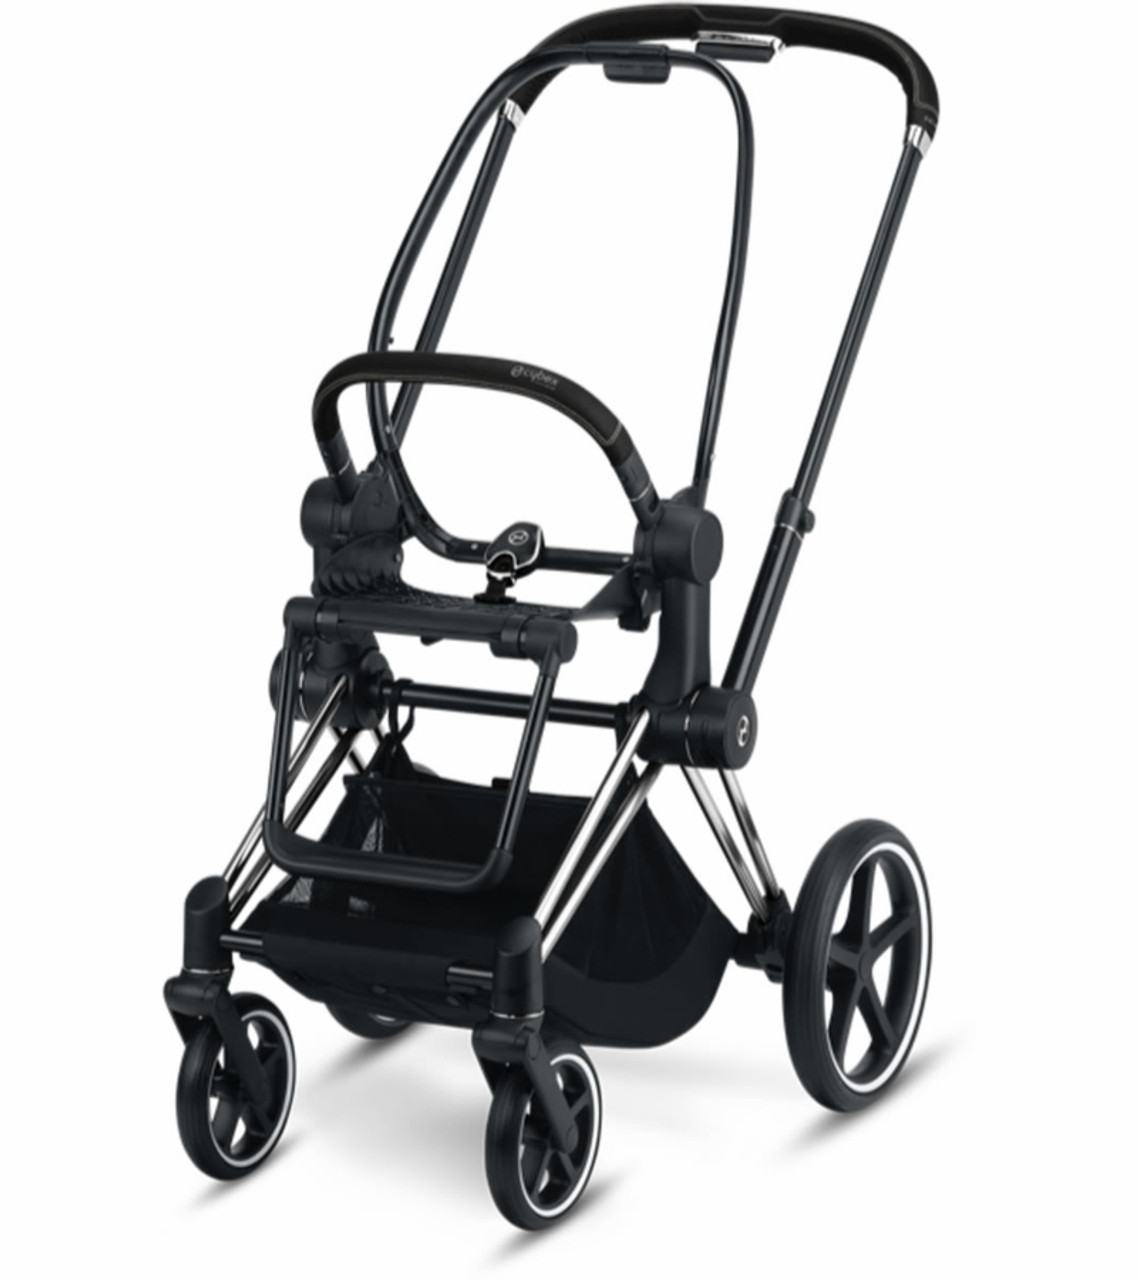 Cybex Priam (2 stores) find best price • Compare today »